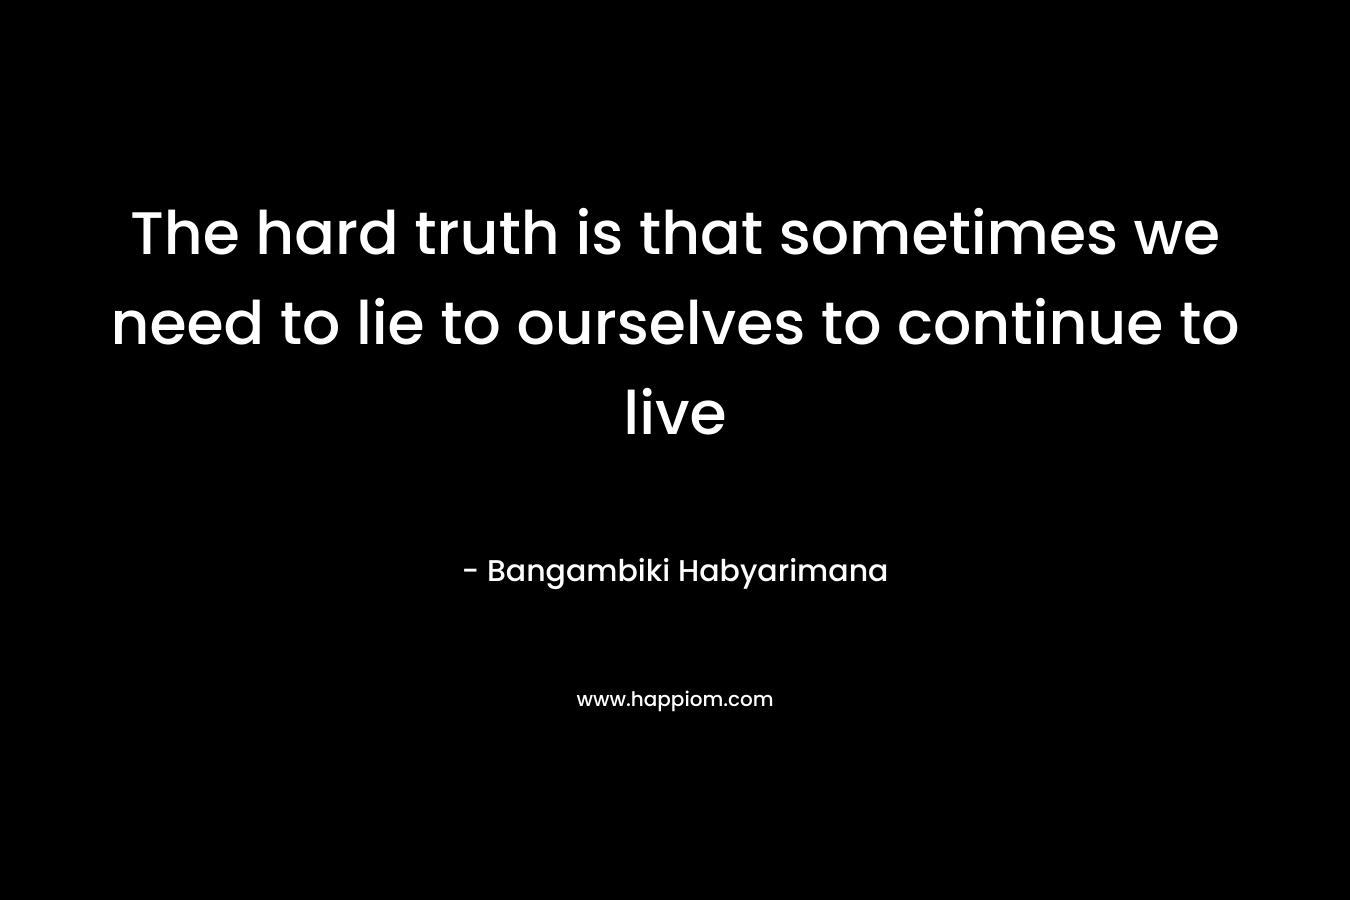 The hard truth is that sometimes we need to lie to ourselves to continue to live